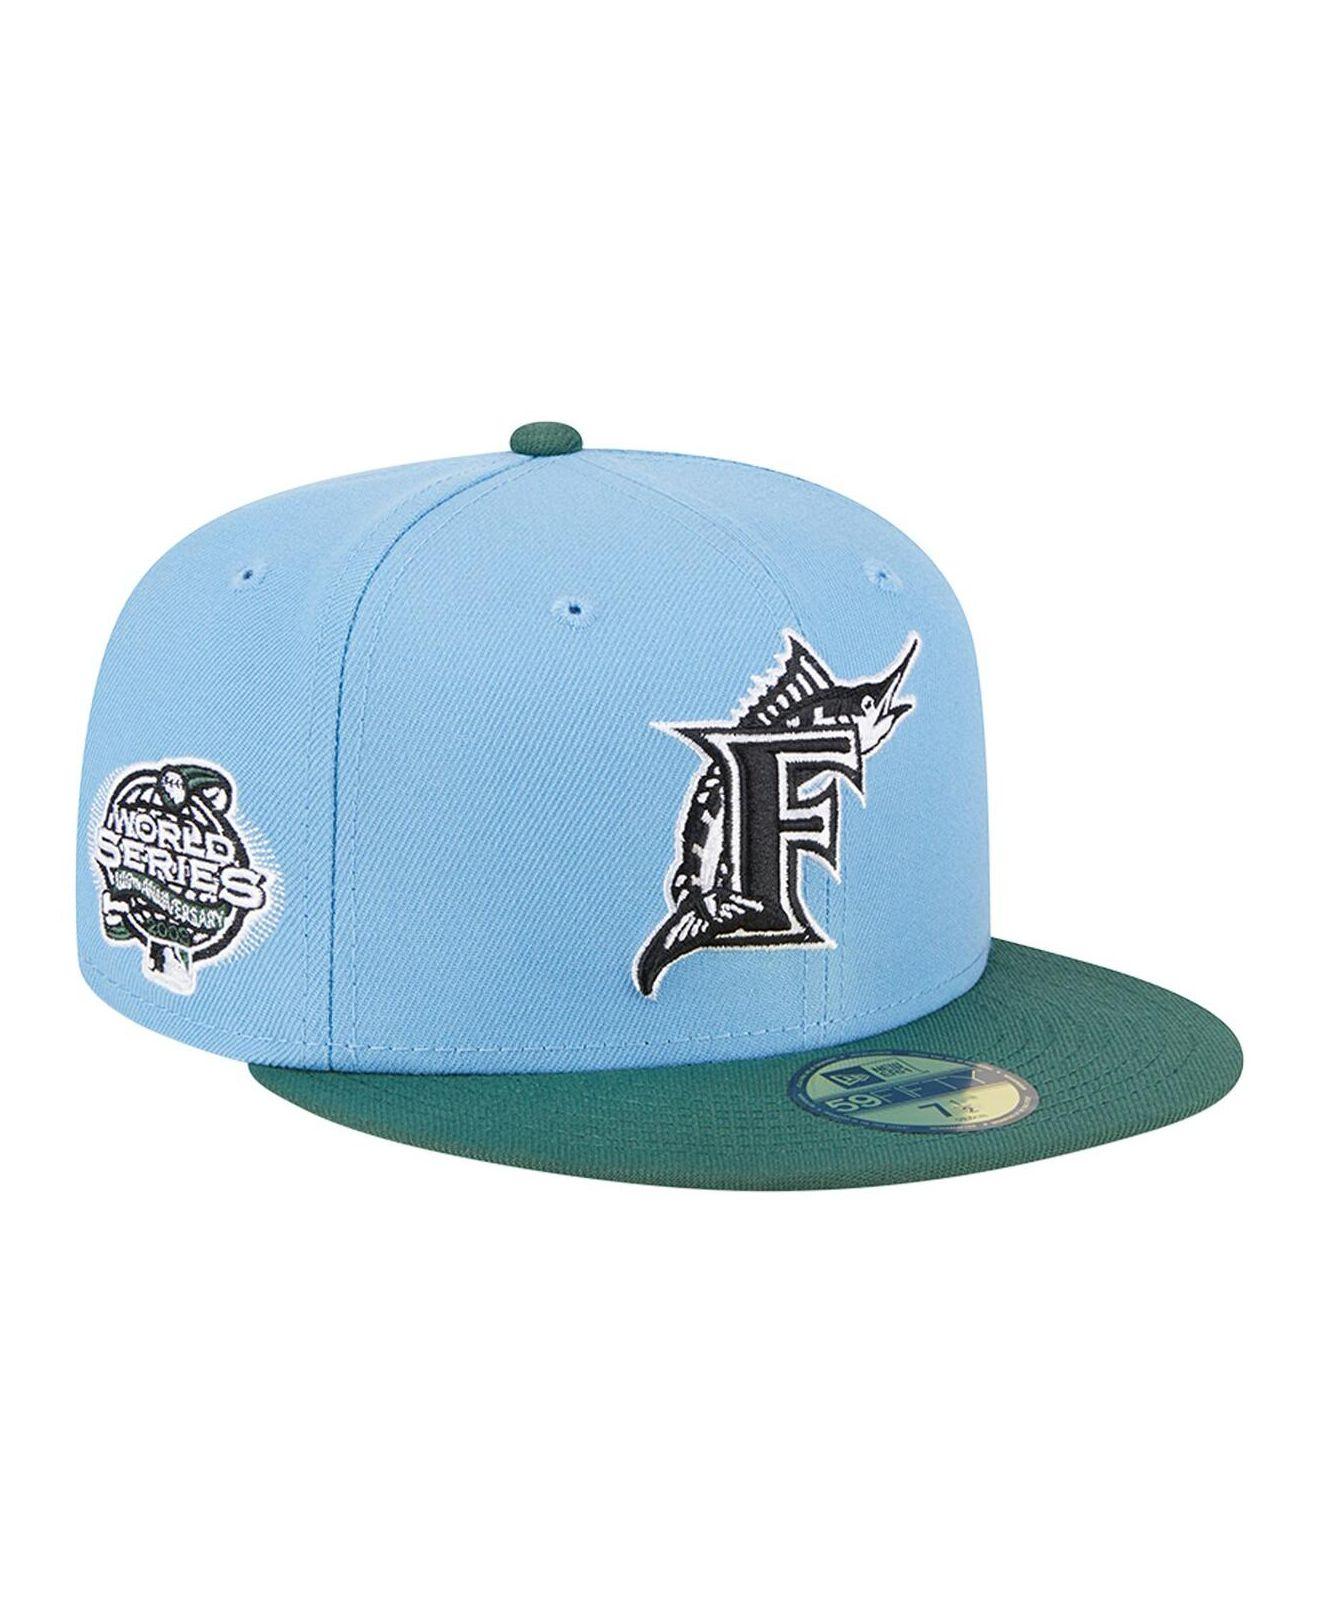 Lids Detroit Tigers New Era Dolphin 59FIFTY Fitted Hat - Gray/Blue